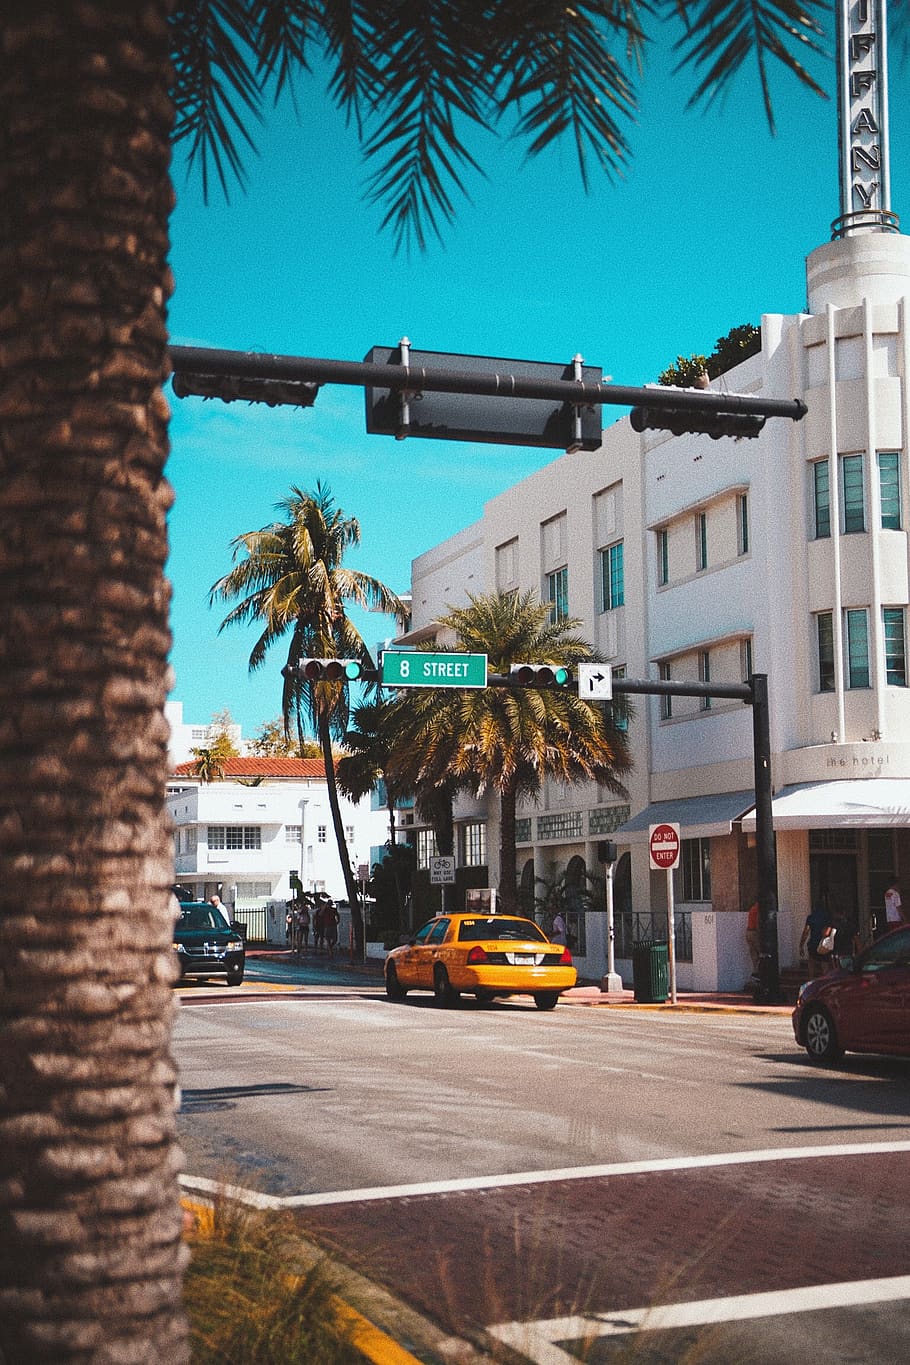 A street with traffic lights and palm trees - Miami